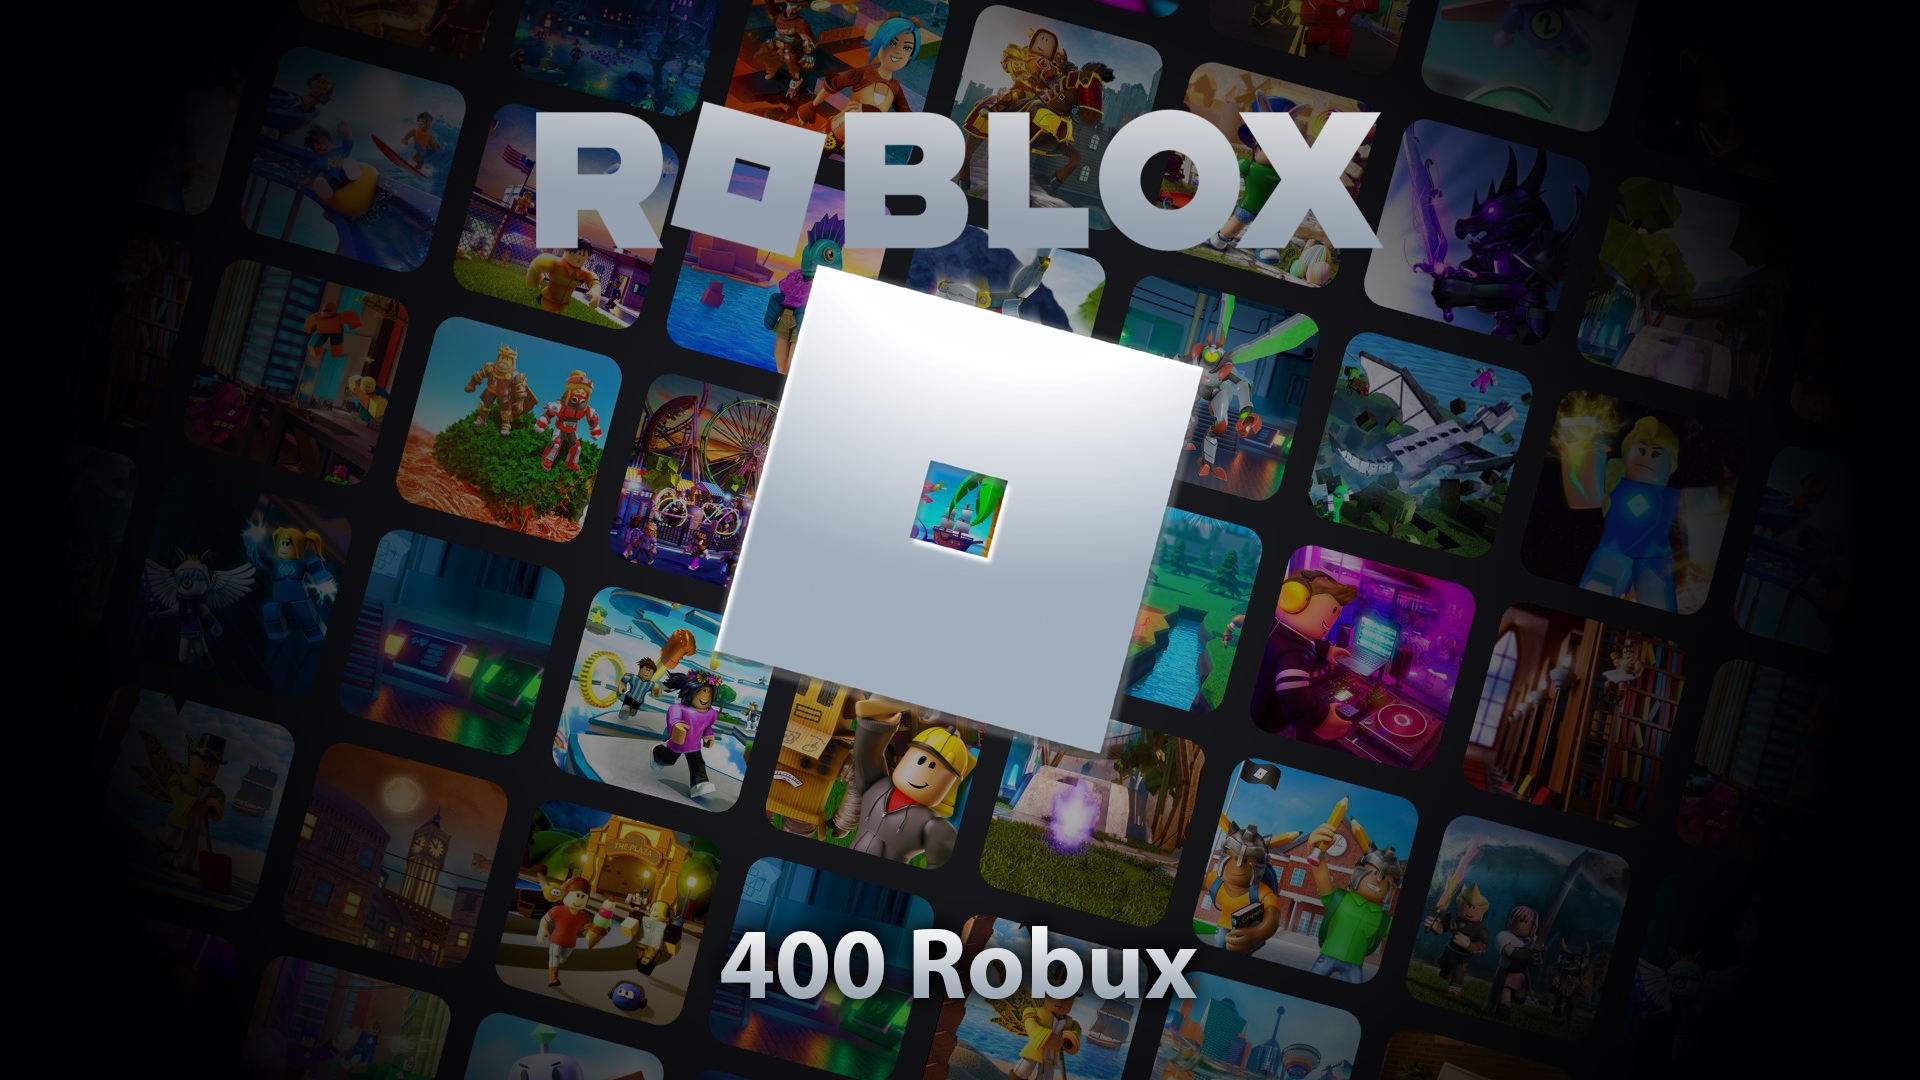 Roblox Gift Card Code - 400 Robux Or $5 Roblox (Code Only) : :  Video Games